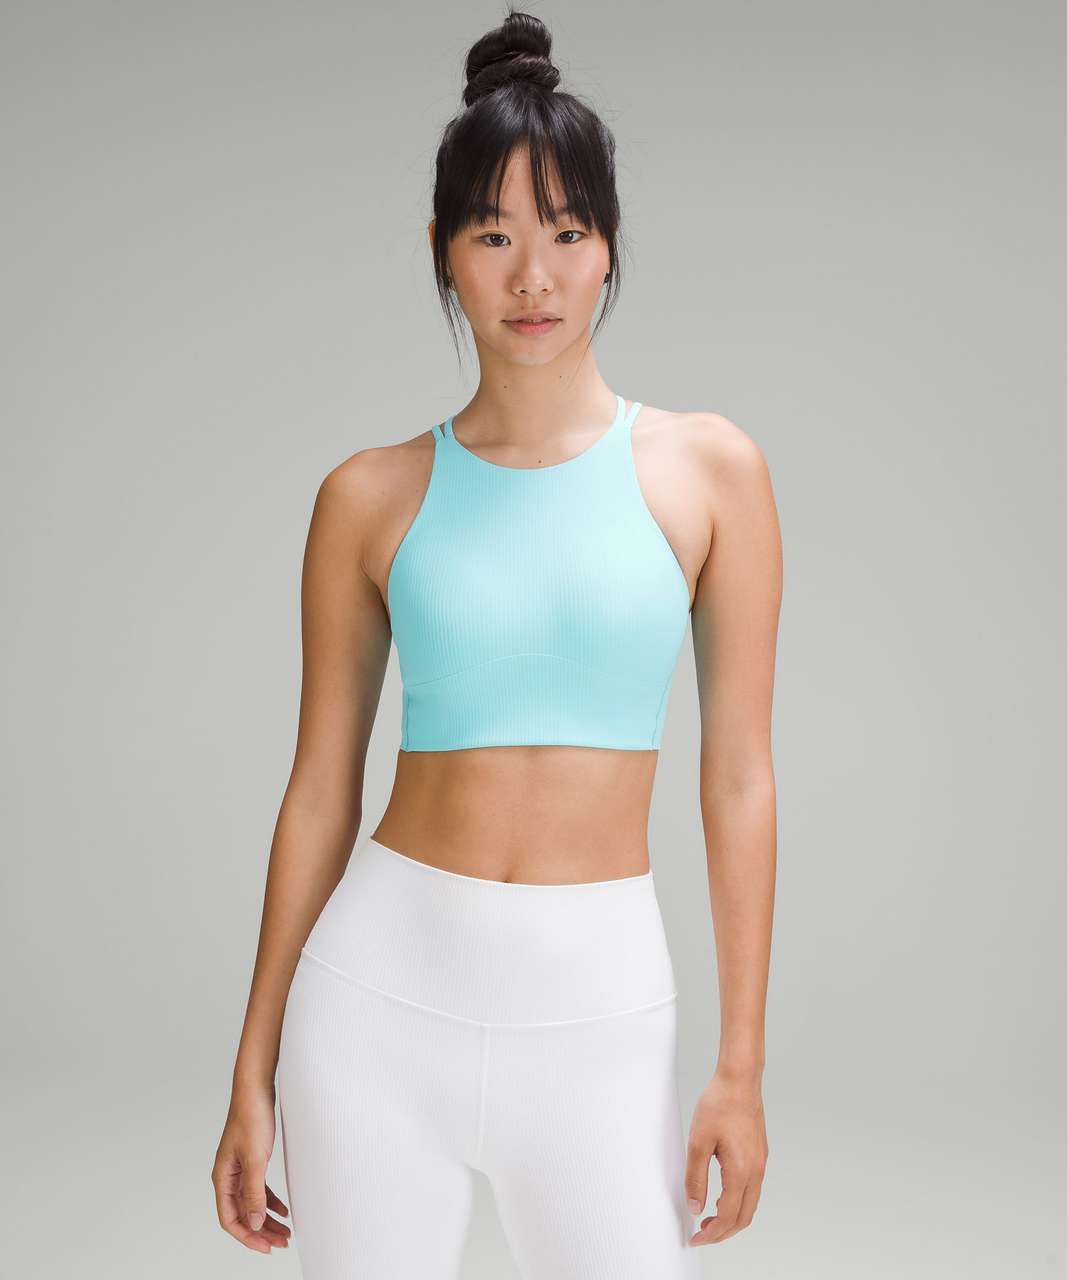 WMTM Fit Pic - Like a Cloud High-Neck Longline in Bronze Green and